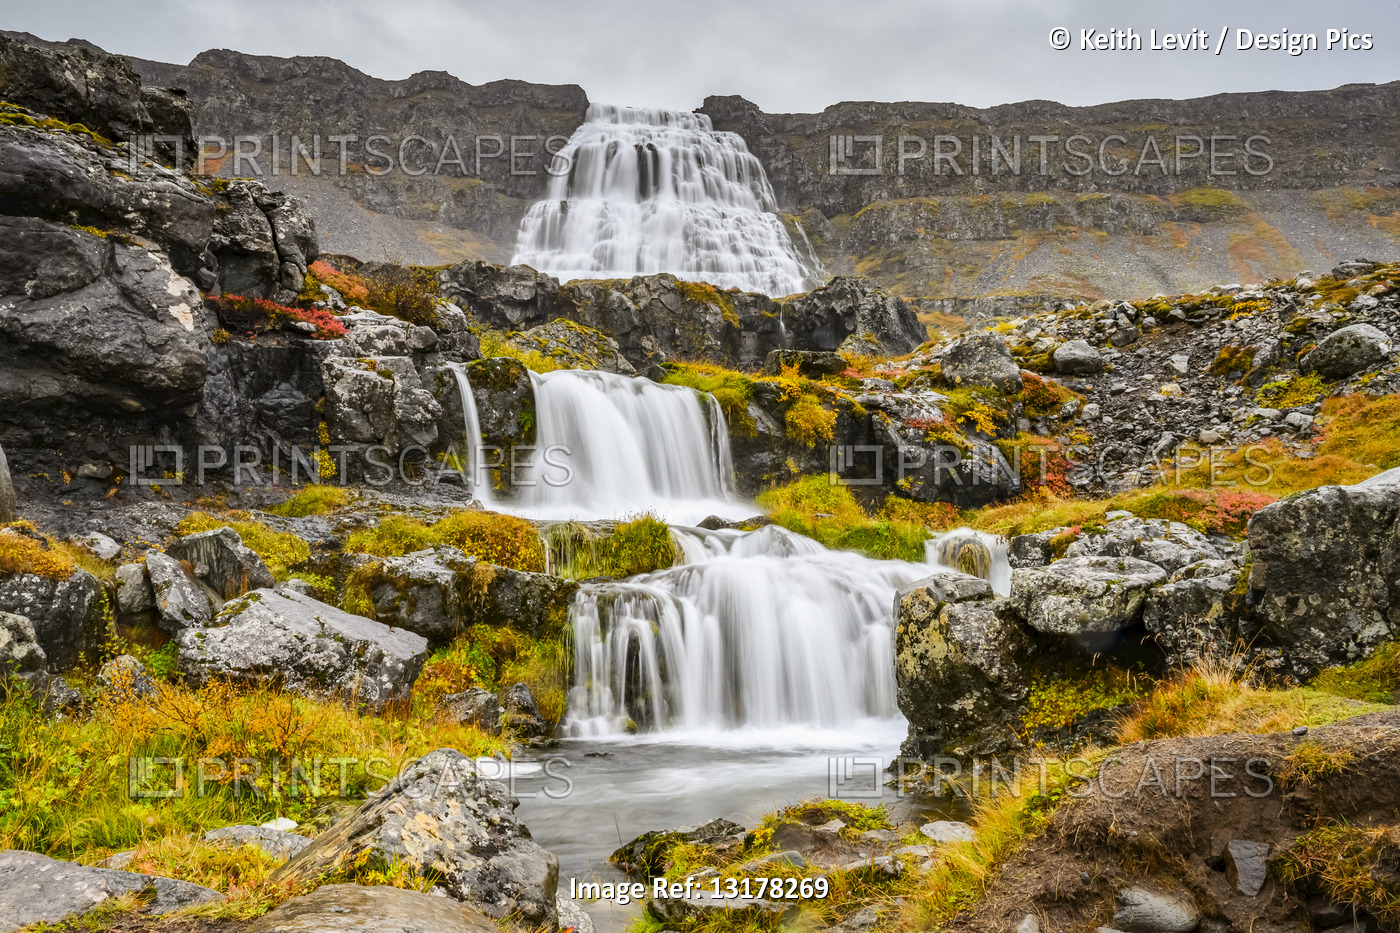 Dynjandi (also known as Fjallfoss) is a series of waterfalls located in the ...